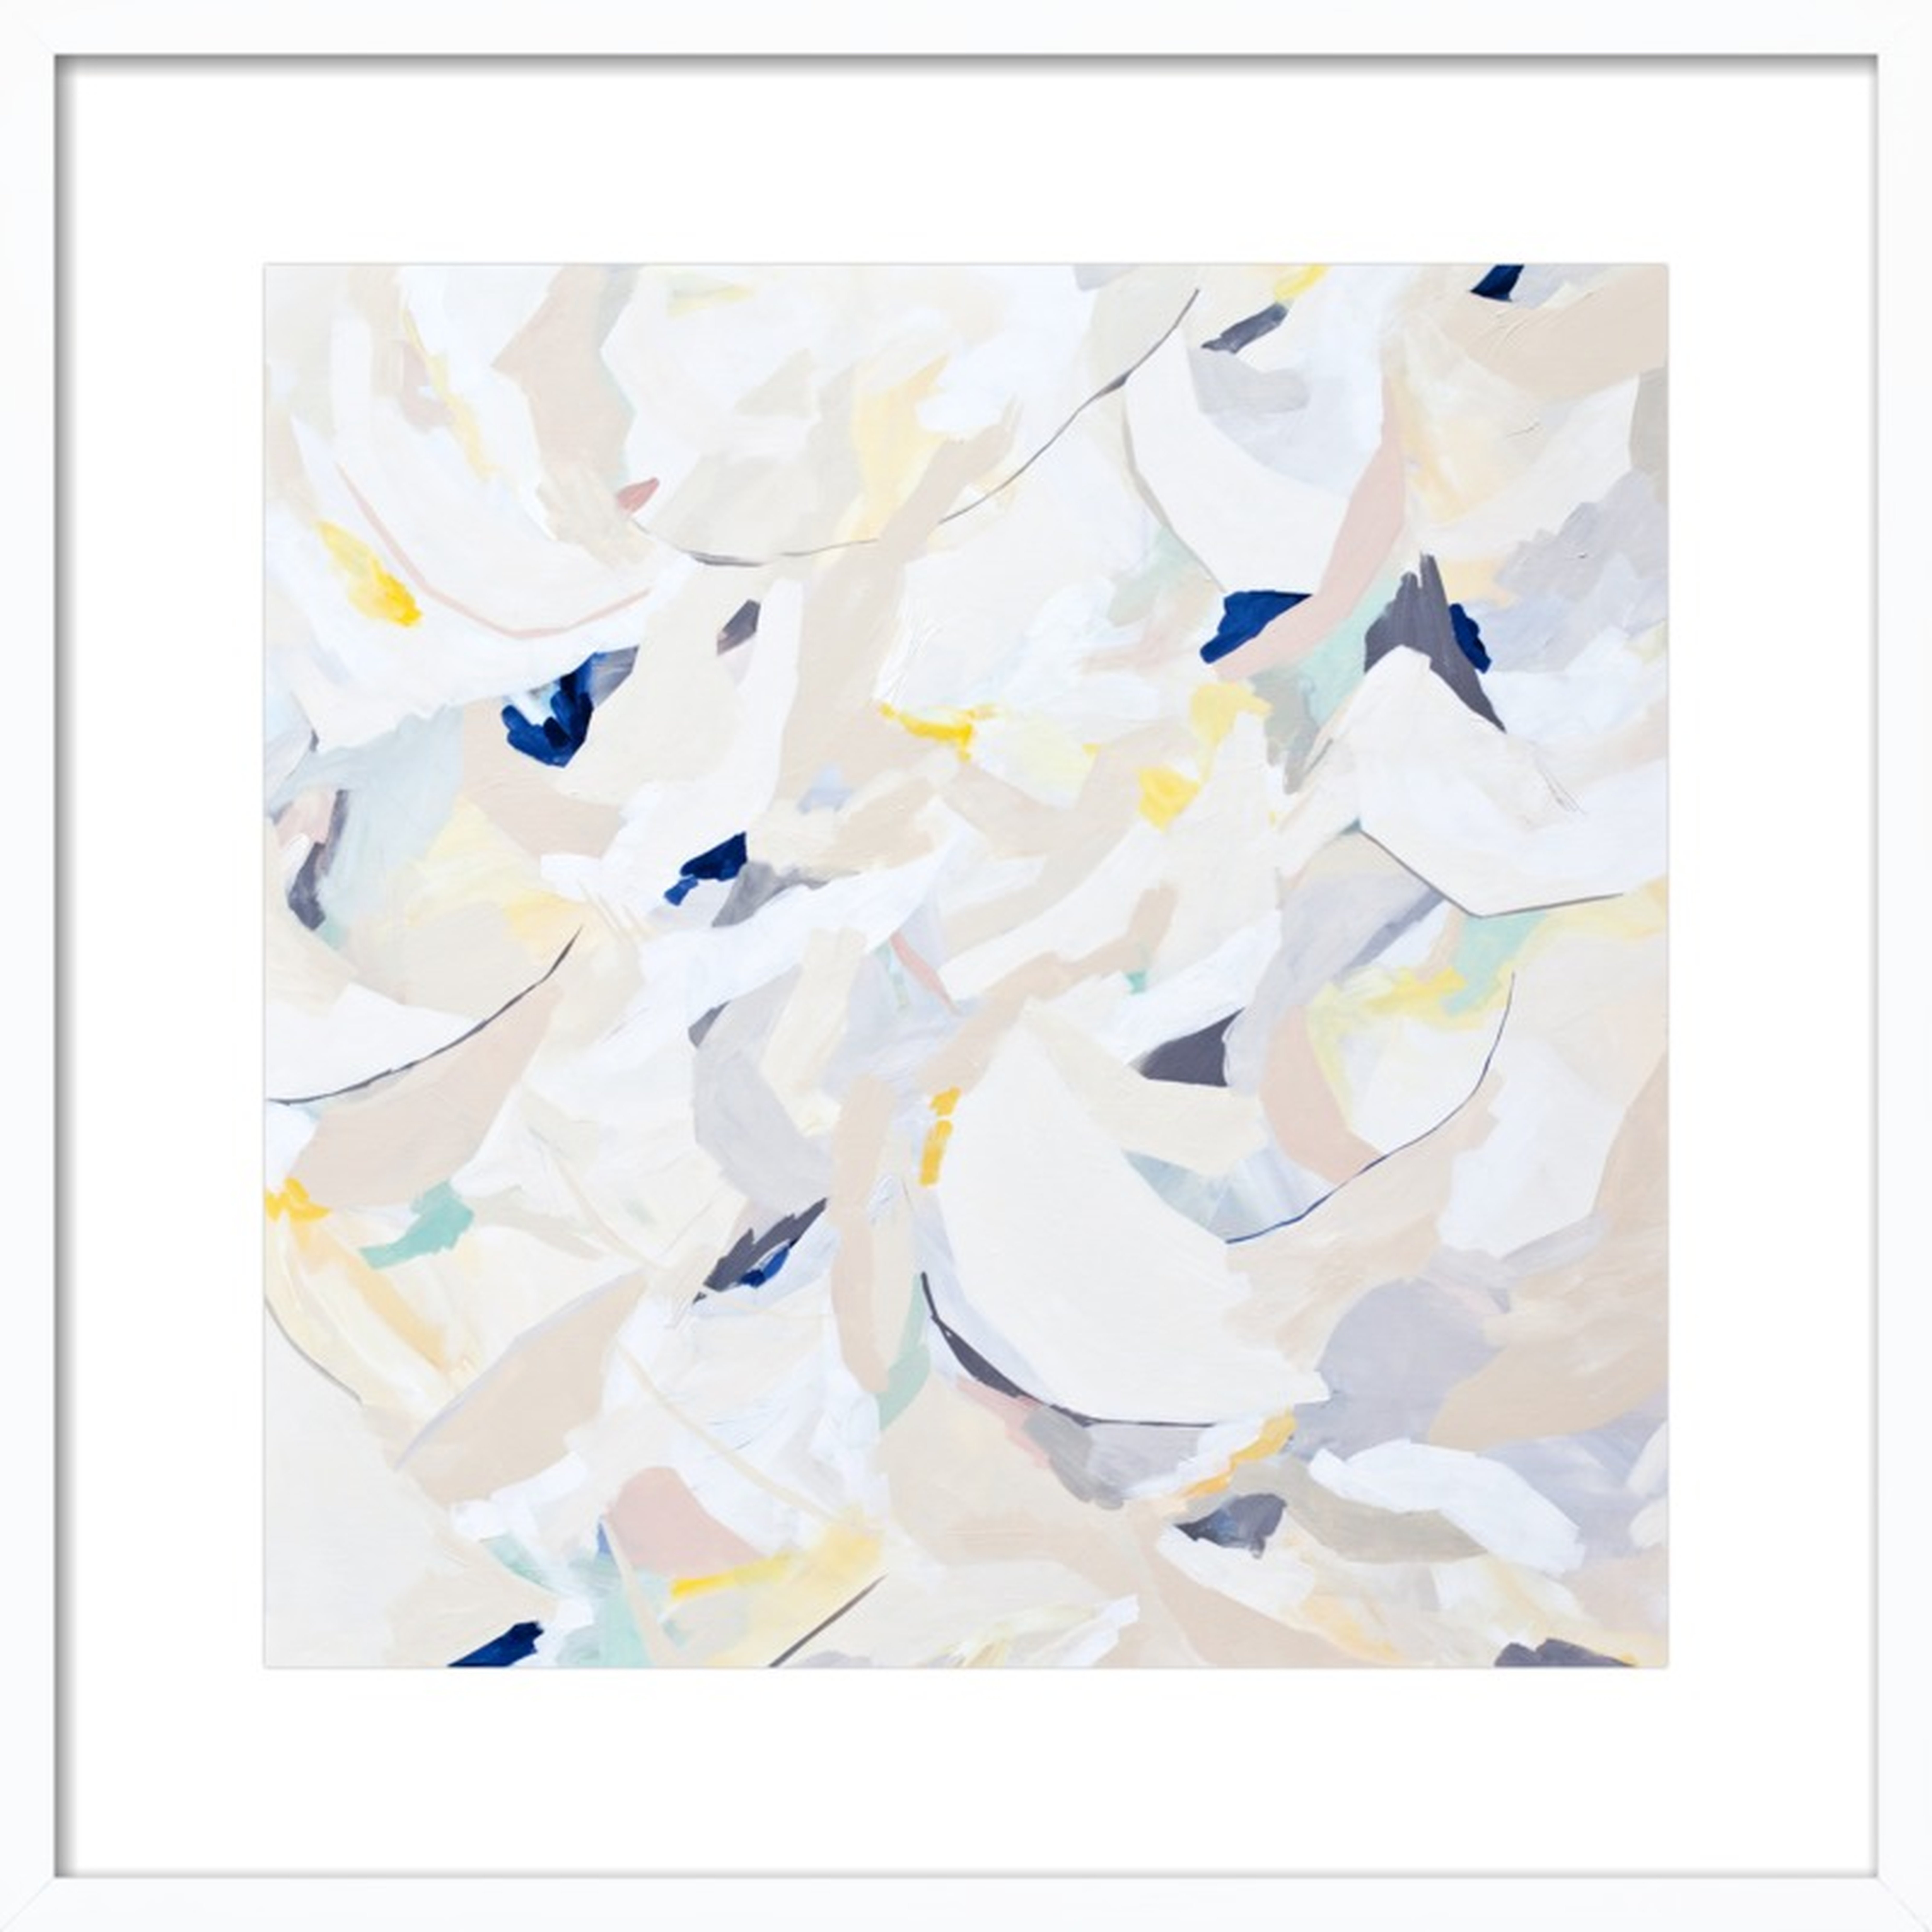 White Walls BY BRITT BASS TURNER - 24 x 24 - White Wood Frame with Matte - Artfully Walls